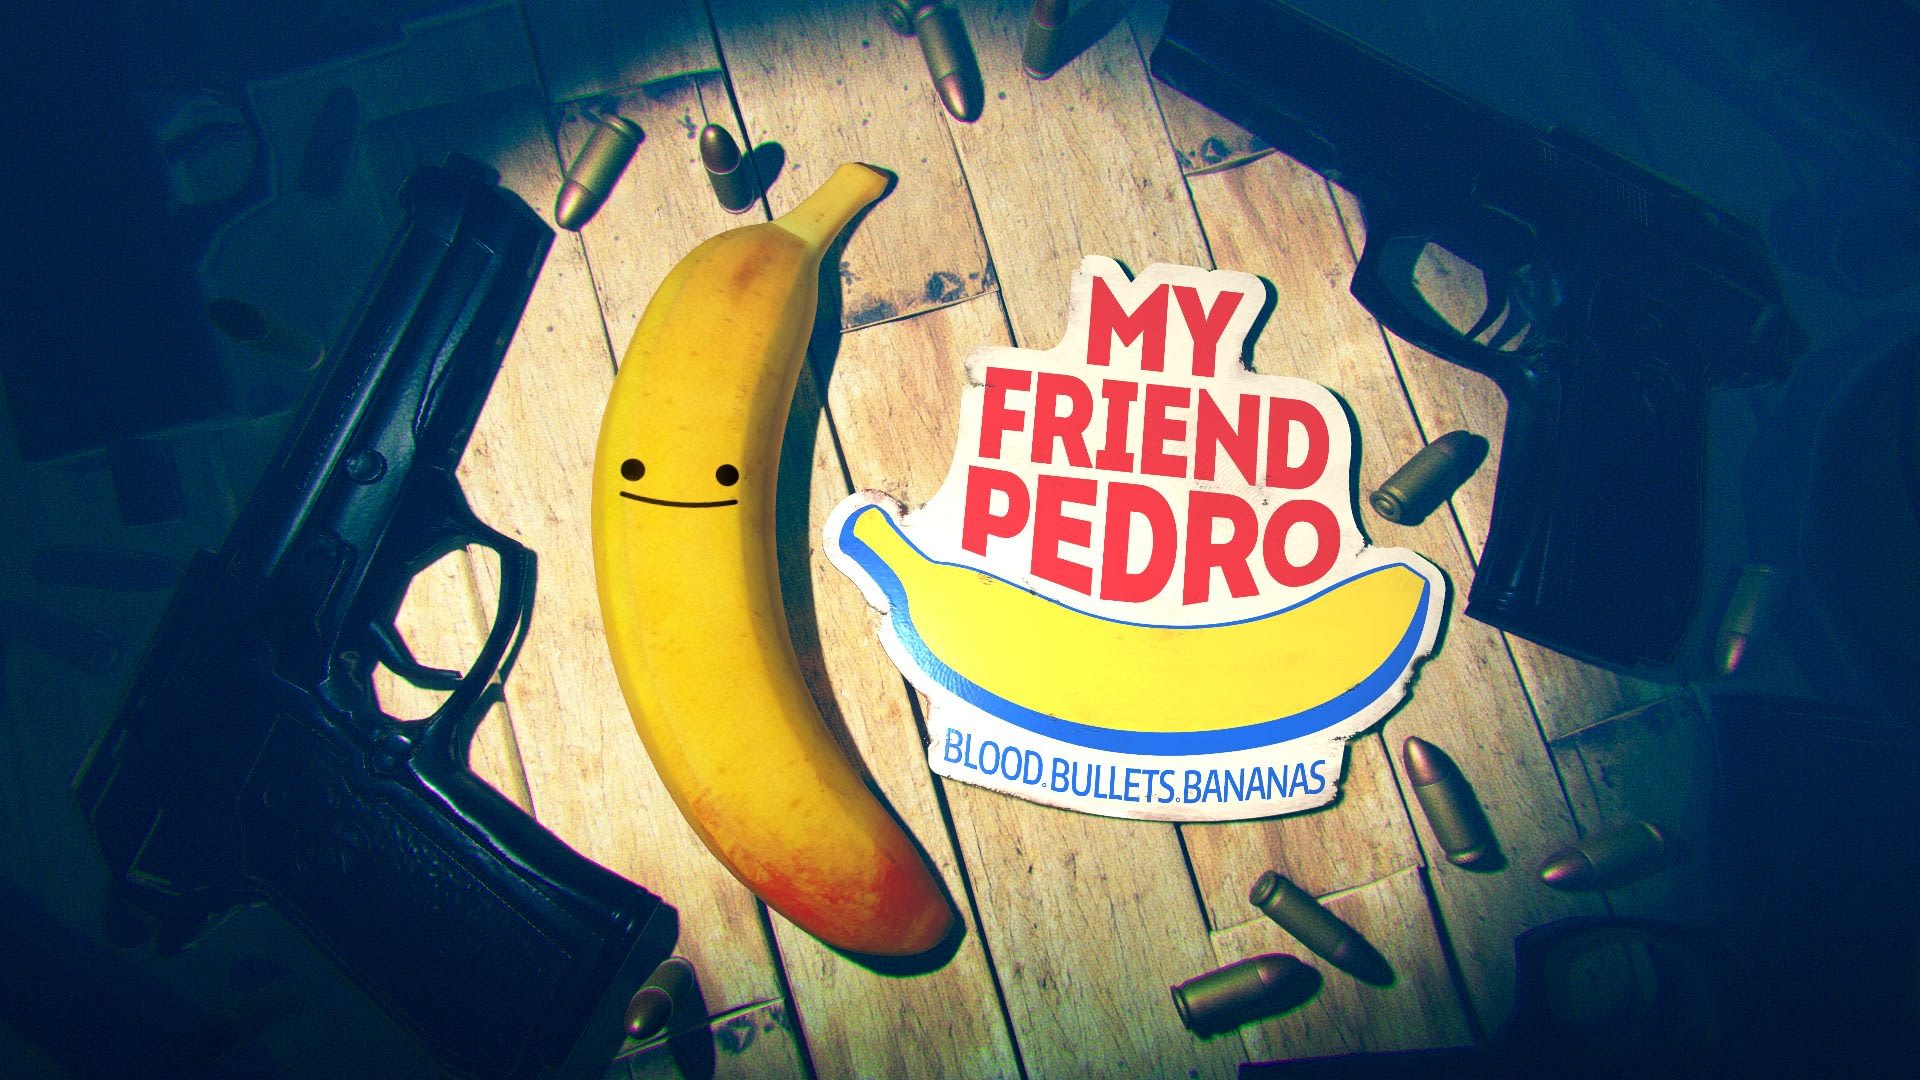 Review: My Friend Pedro is the best unofficial John Wick game